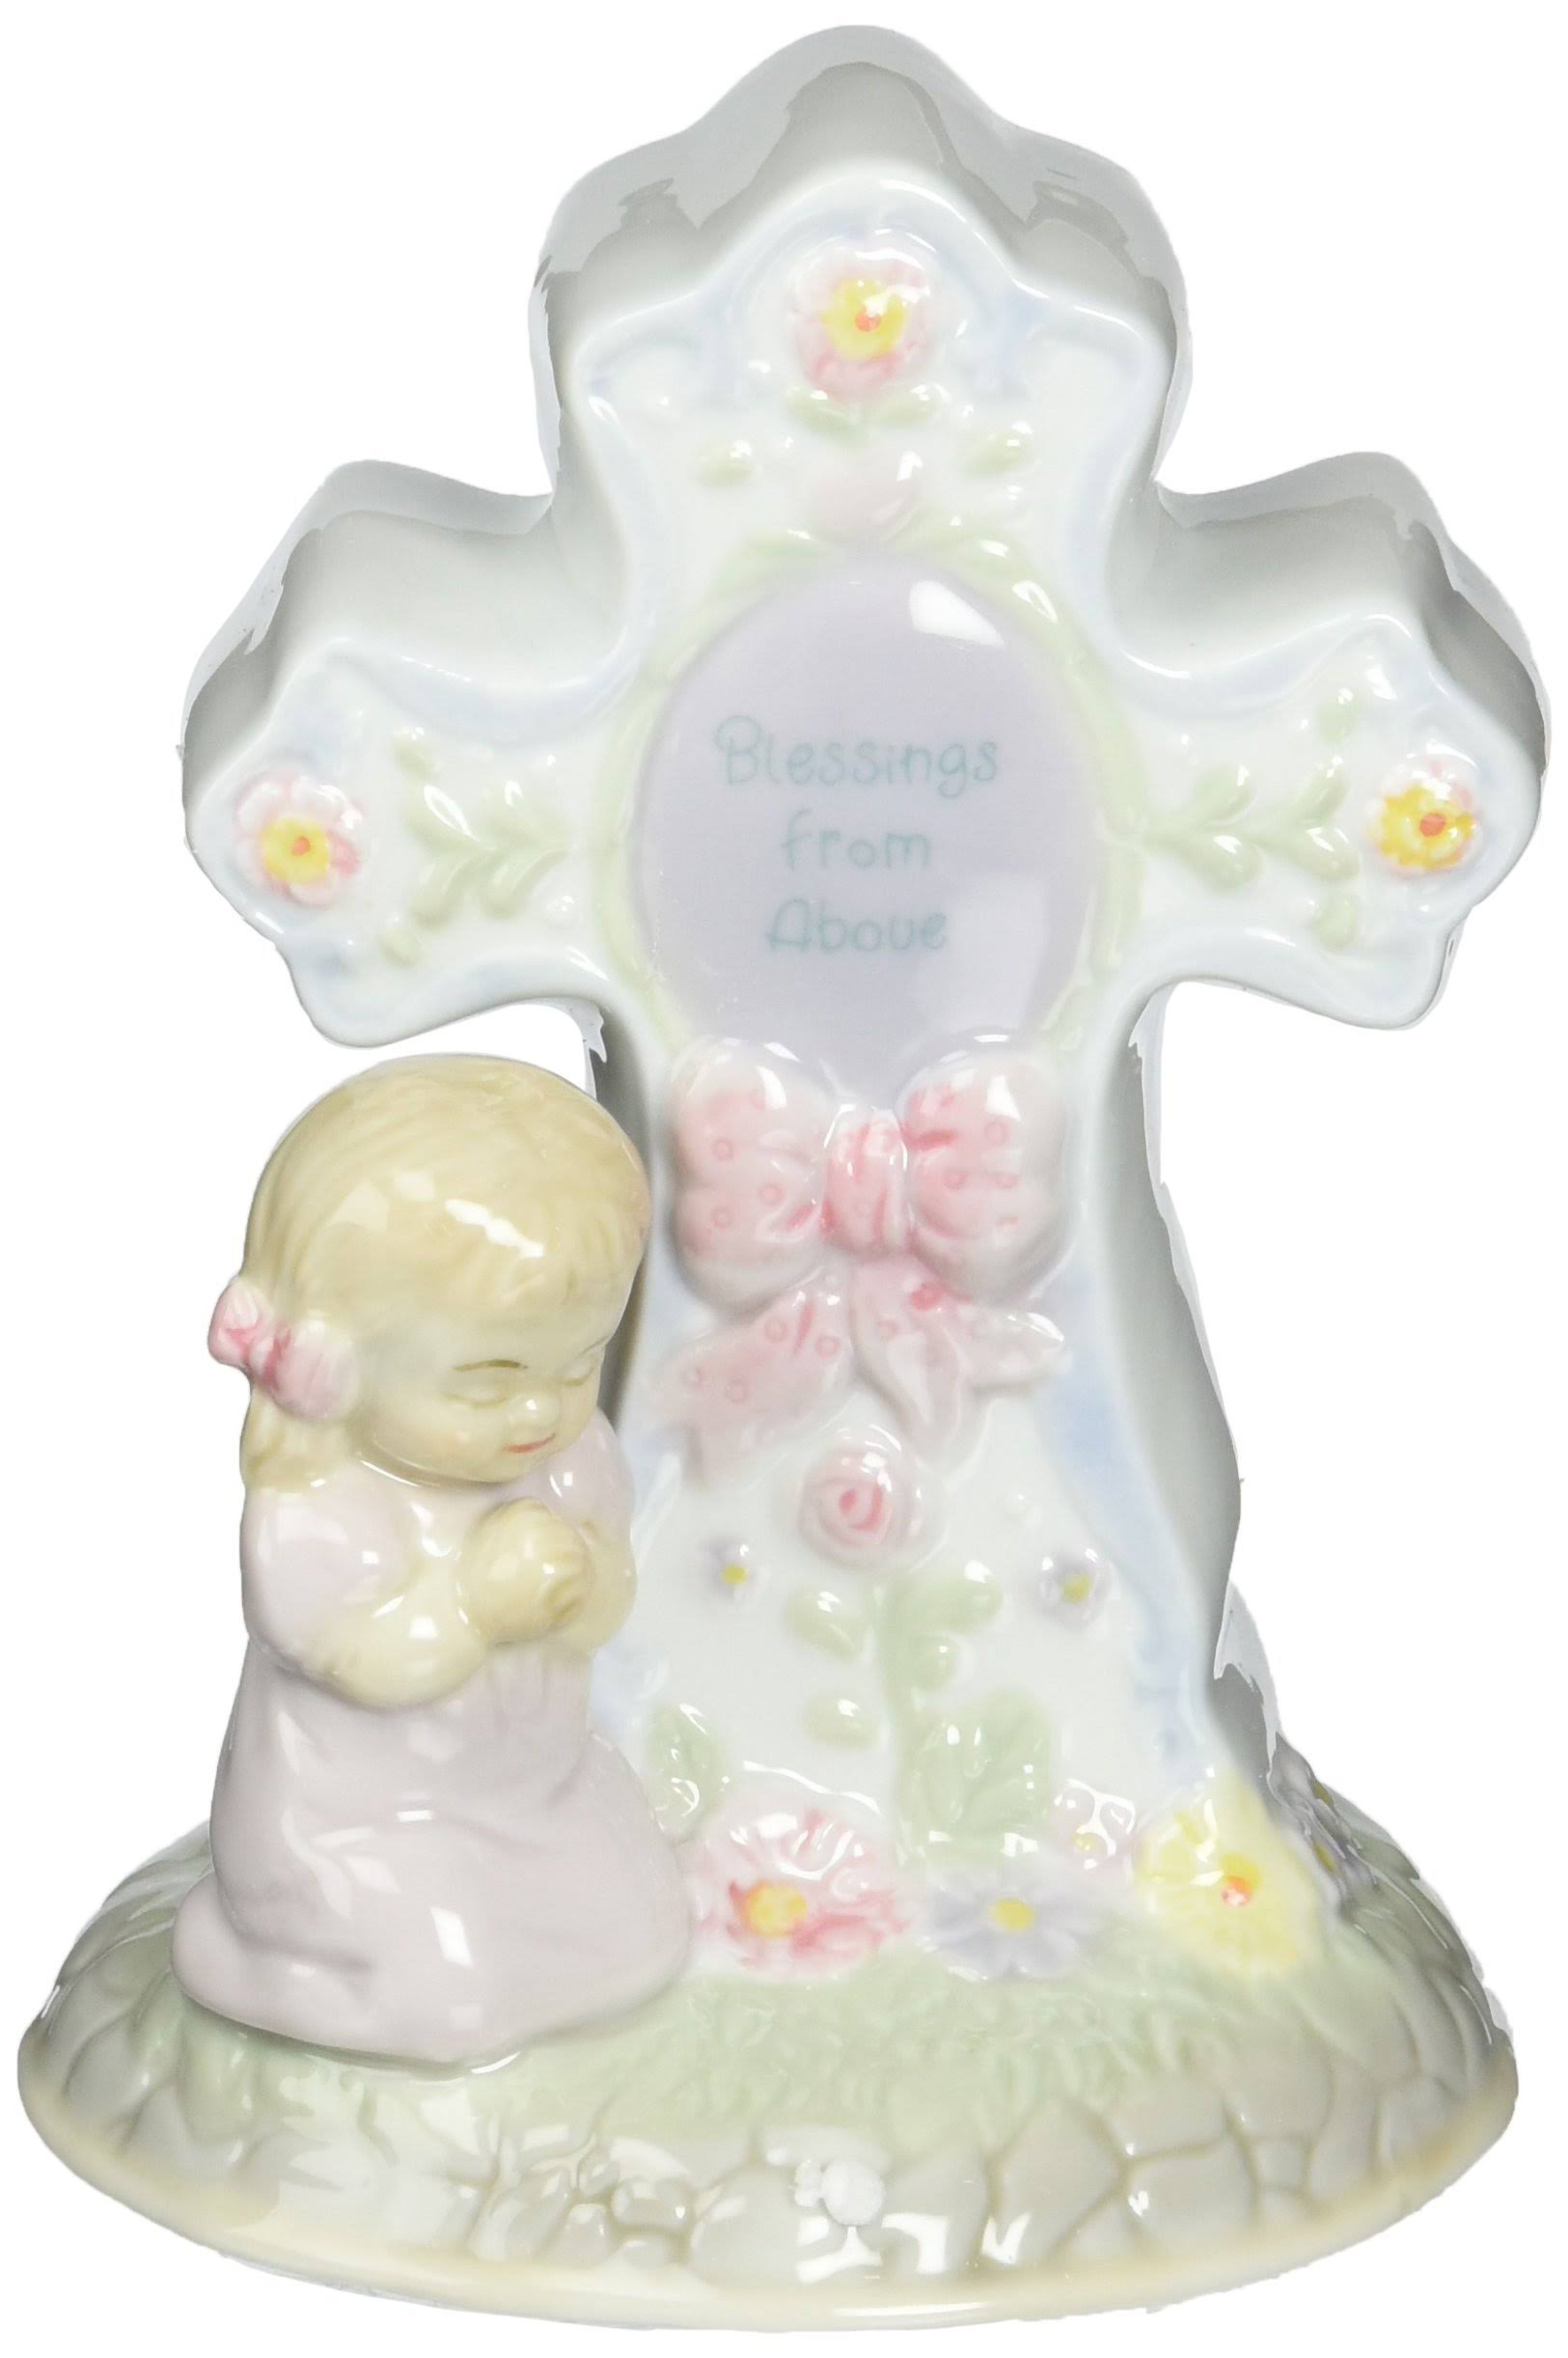 Cosmos Collectible and Figurine Praying Girl Light-up Figurine One-Size